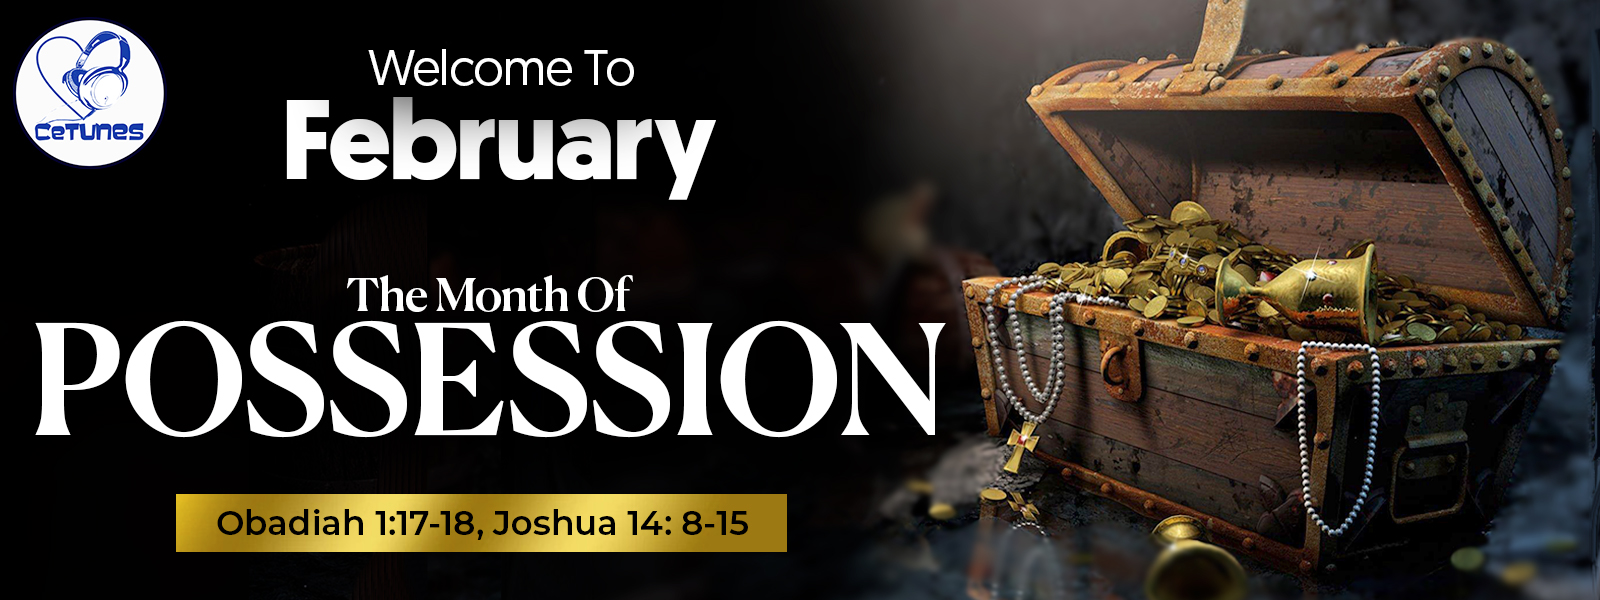 WELCOME TO OUR MONTH OF POSSESION 